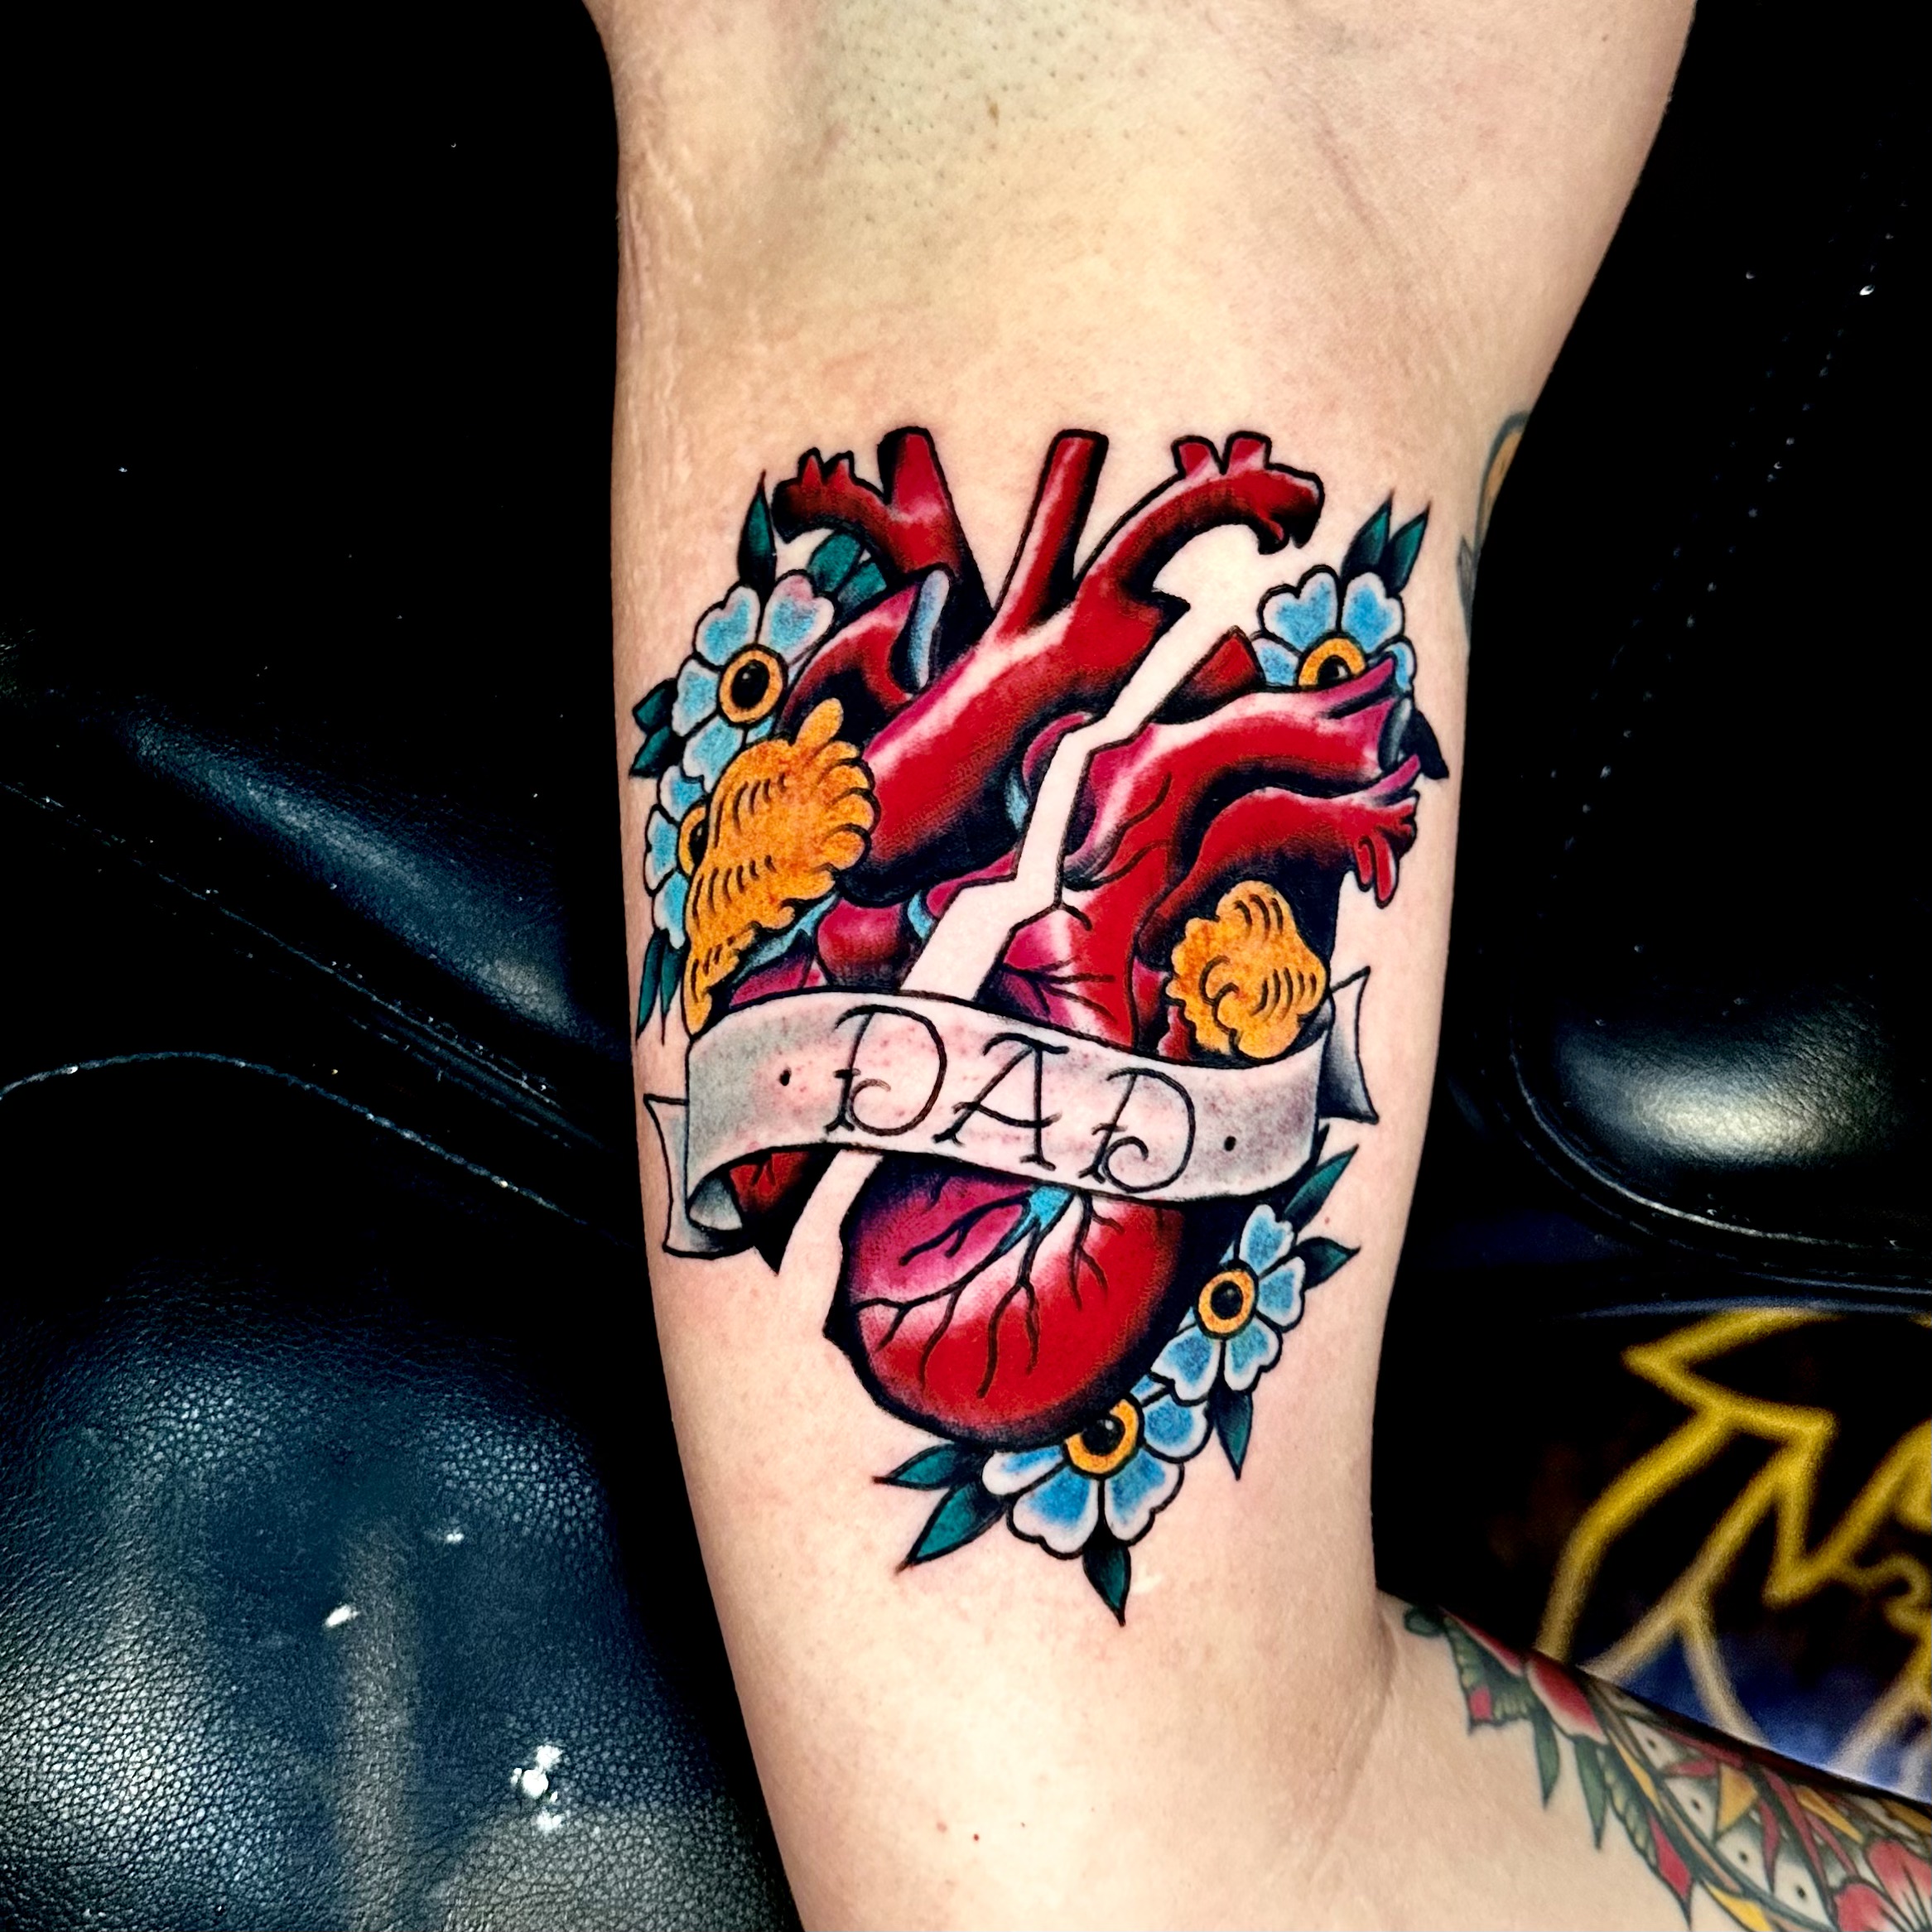 Tattoo of a real heart from Josh Hall